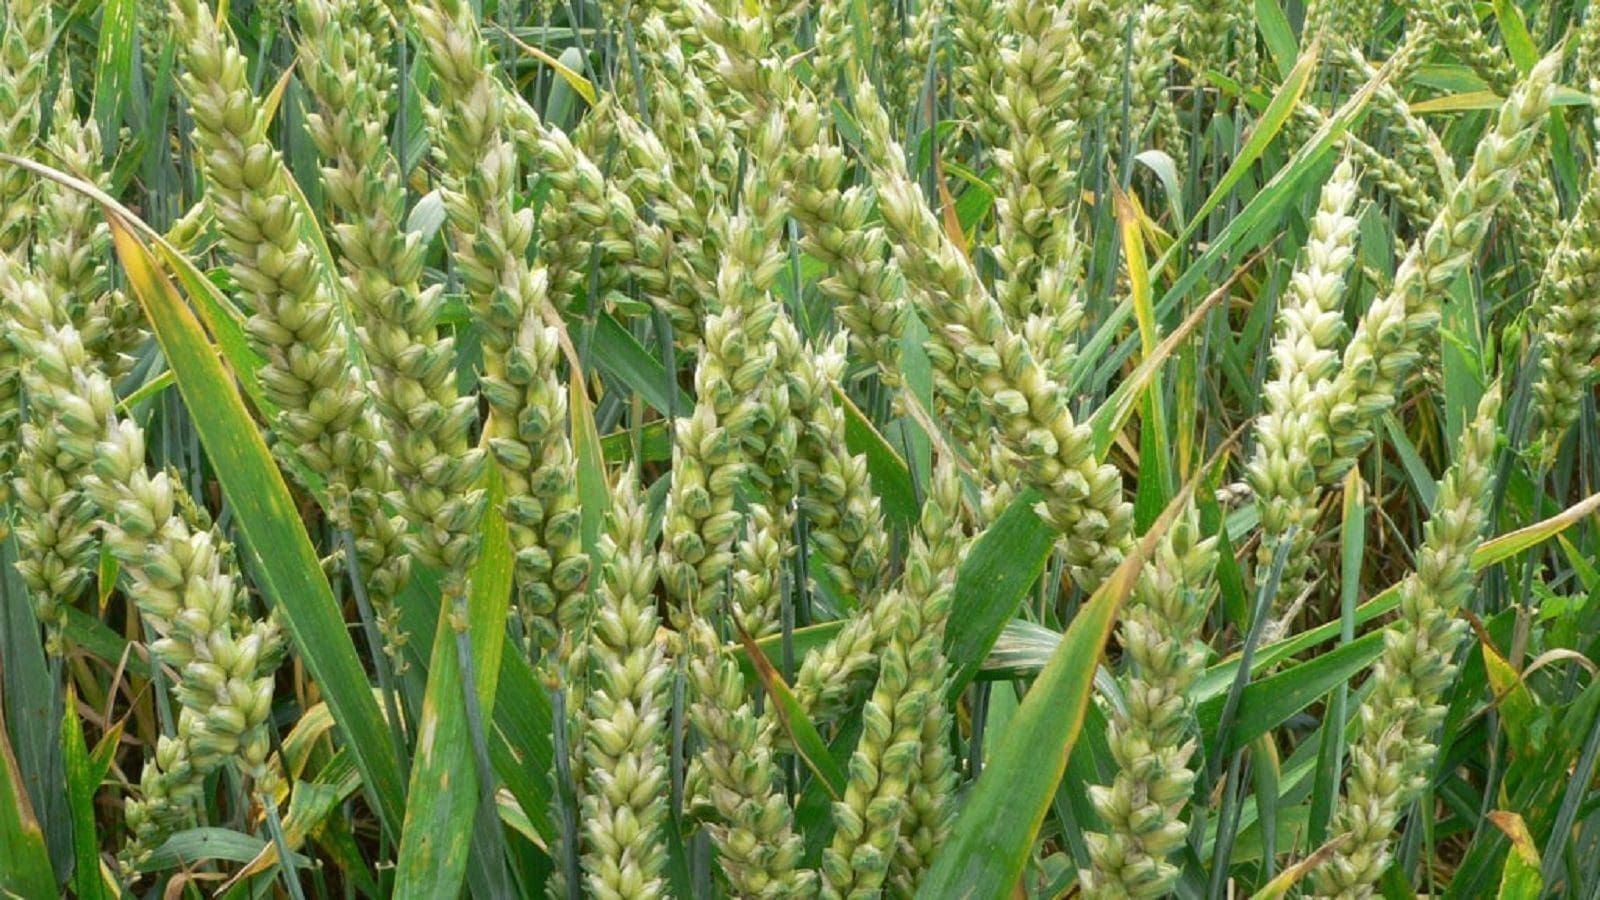 KSU receives funding for cereal crops project